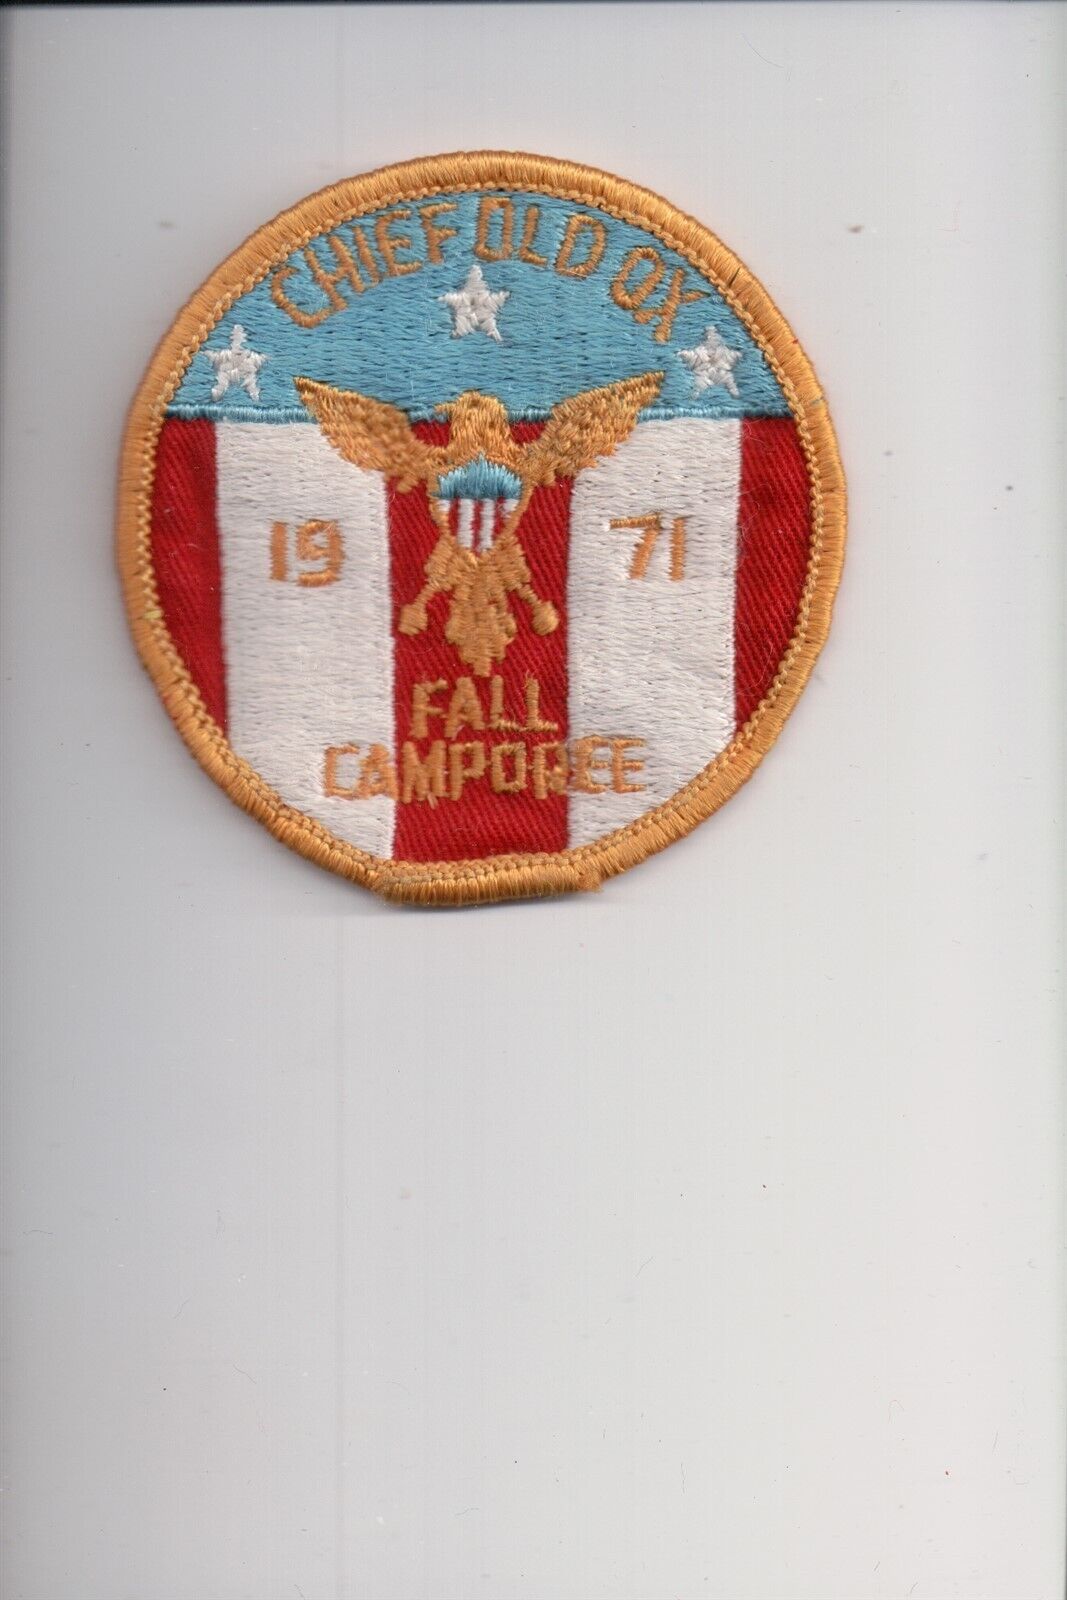 1971 Chief Old Ox Fall Camporee patch